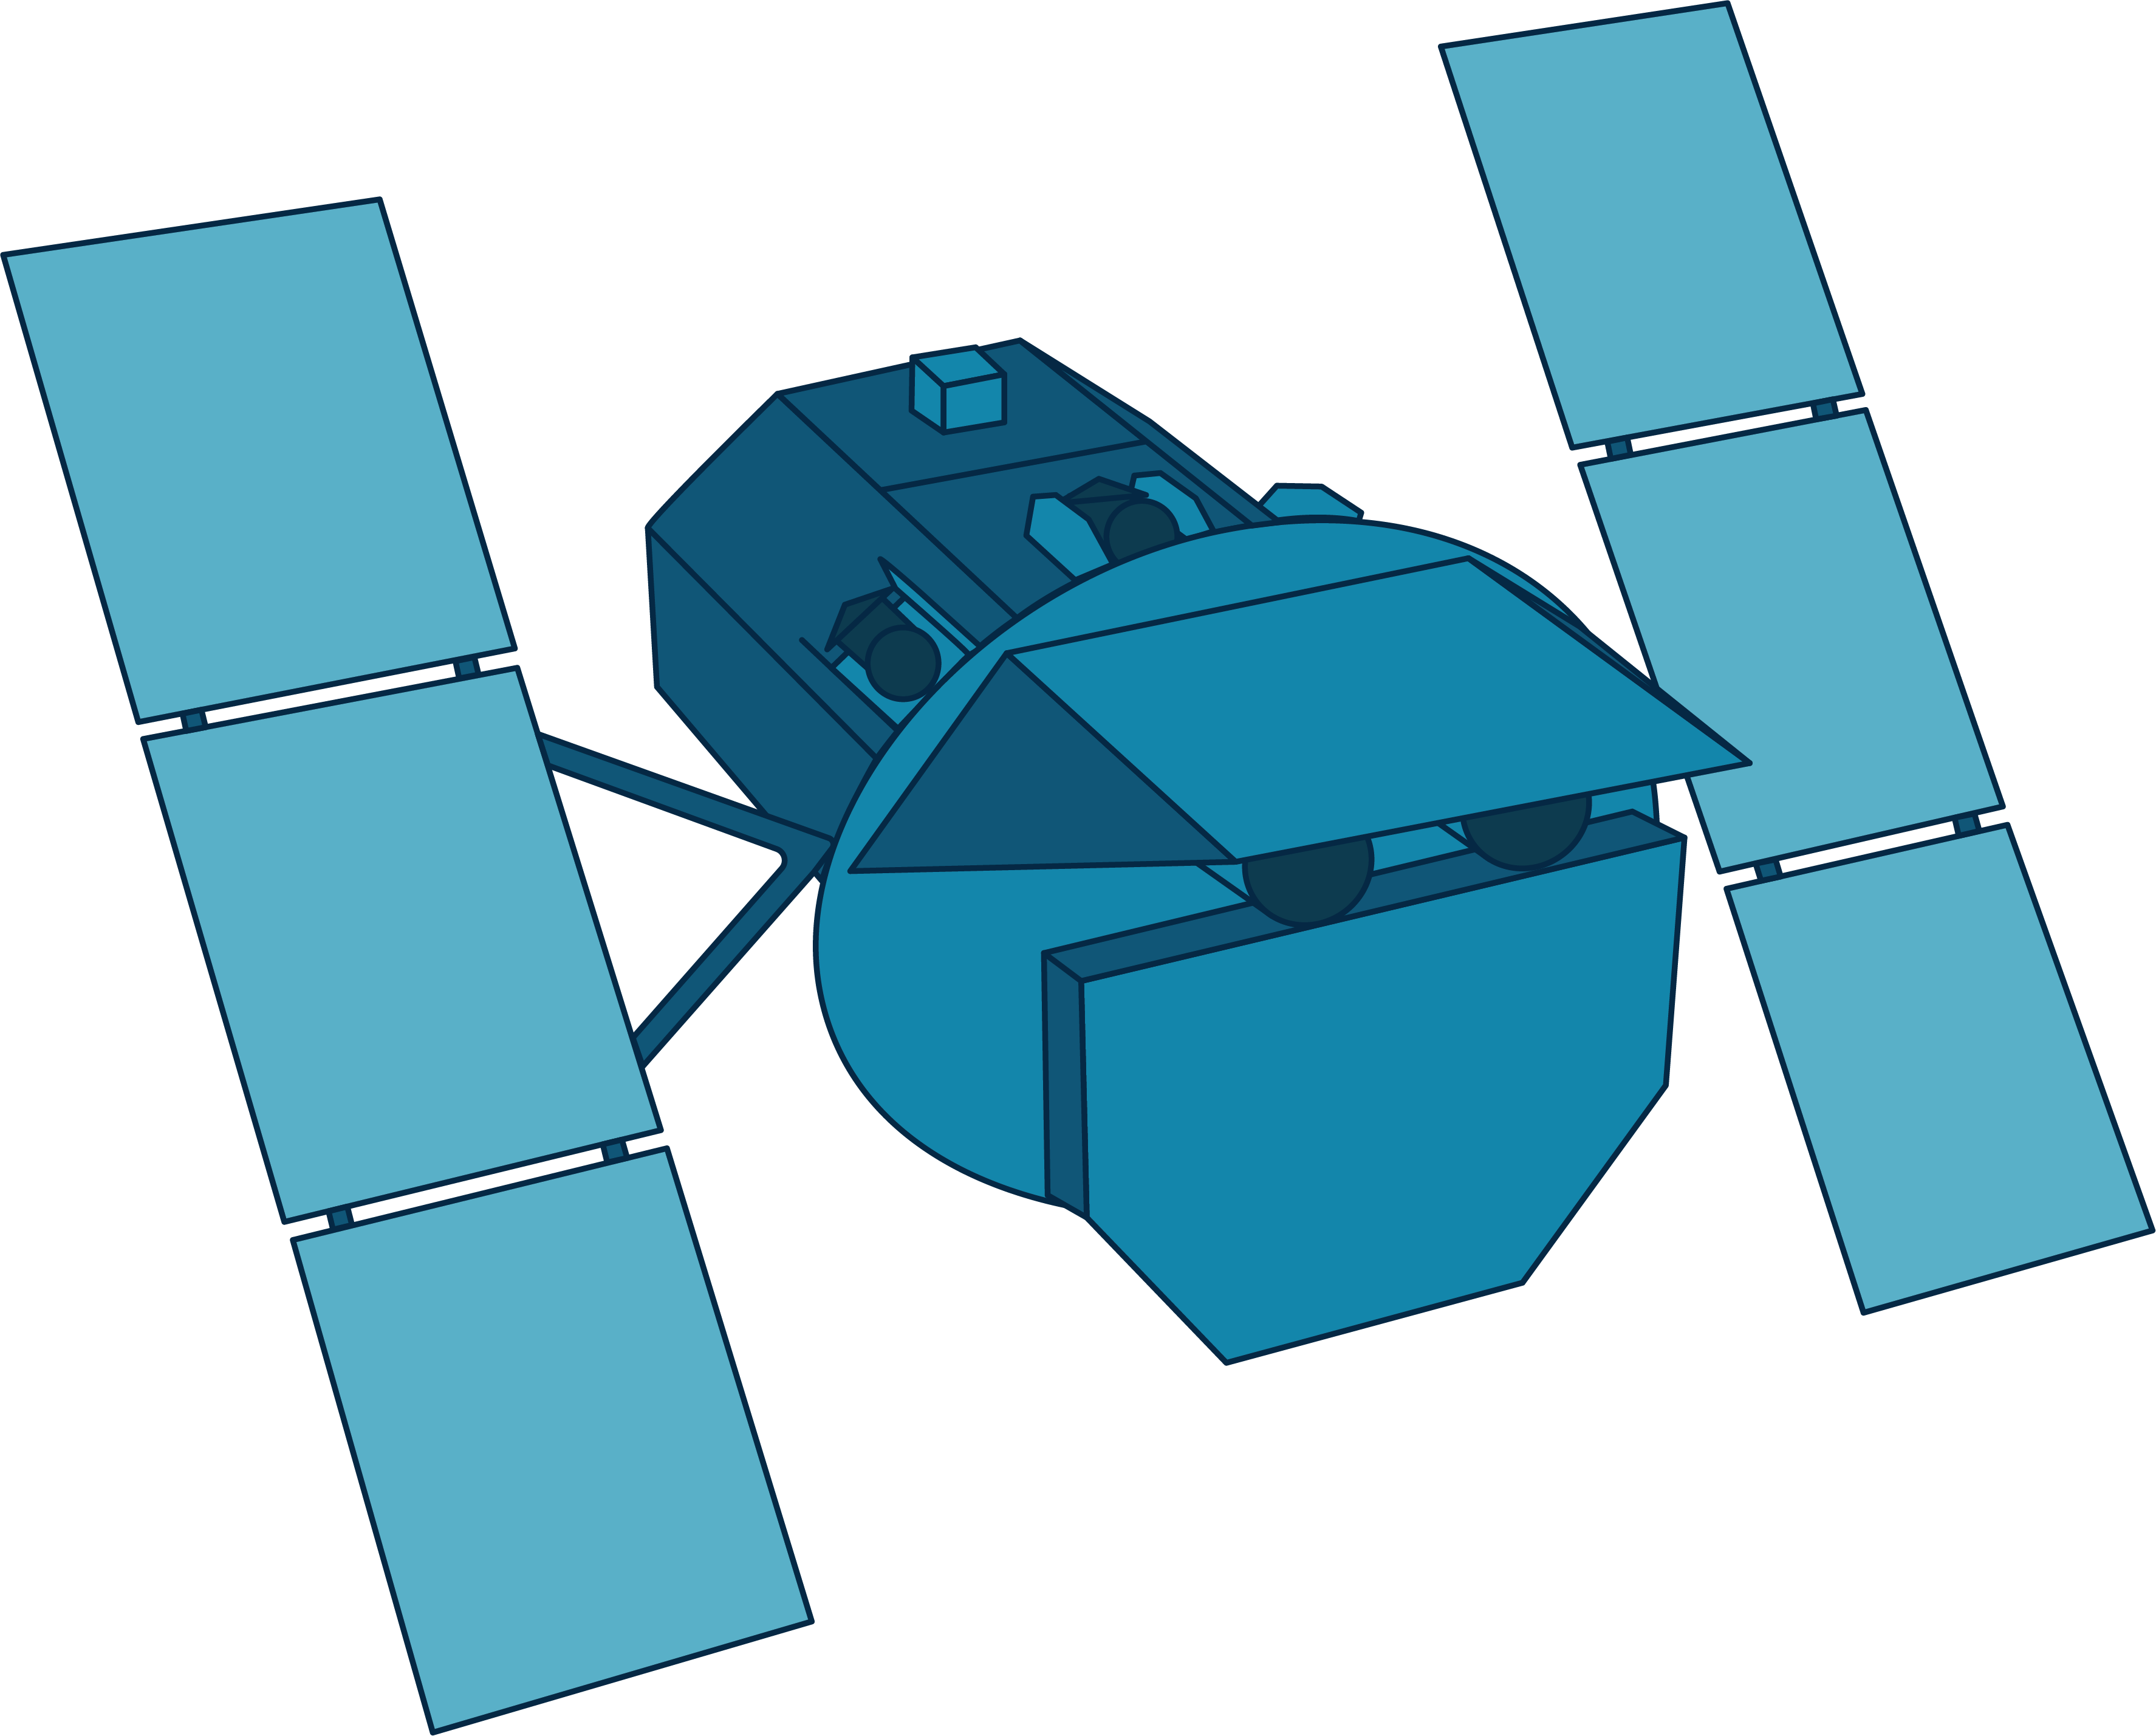 This illustration shows the Swift observatory in shades of blue. A multi-sided cylindrical body is flanked by two solar array "wings." The front face has a large squared-off half-circle instrument, two small cylindrical telescopes, and a shield along the top edge.